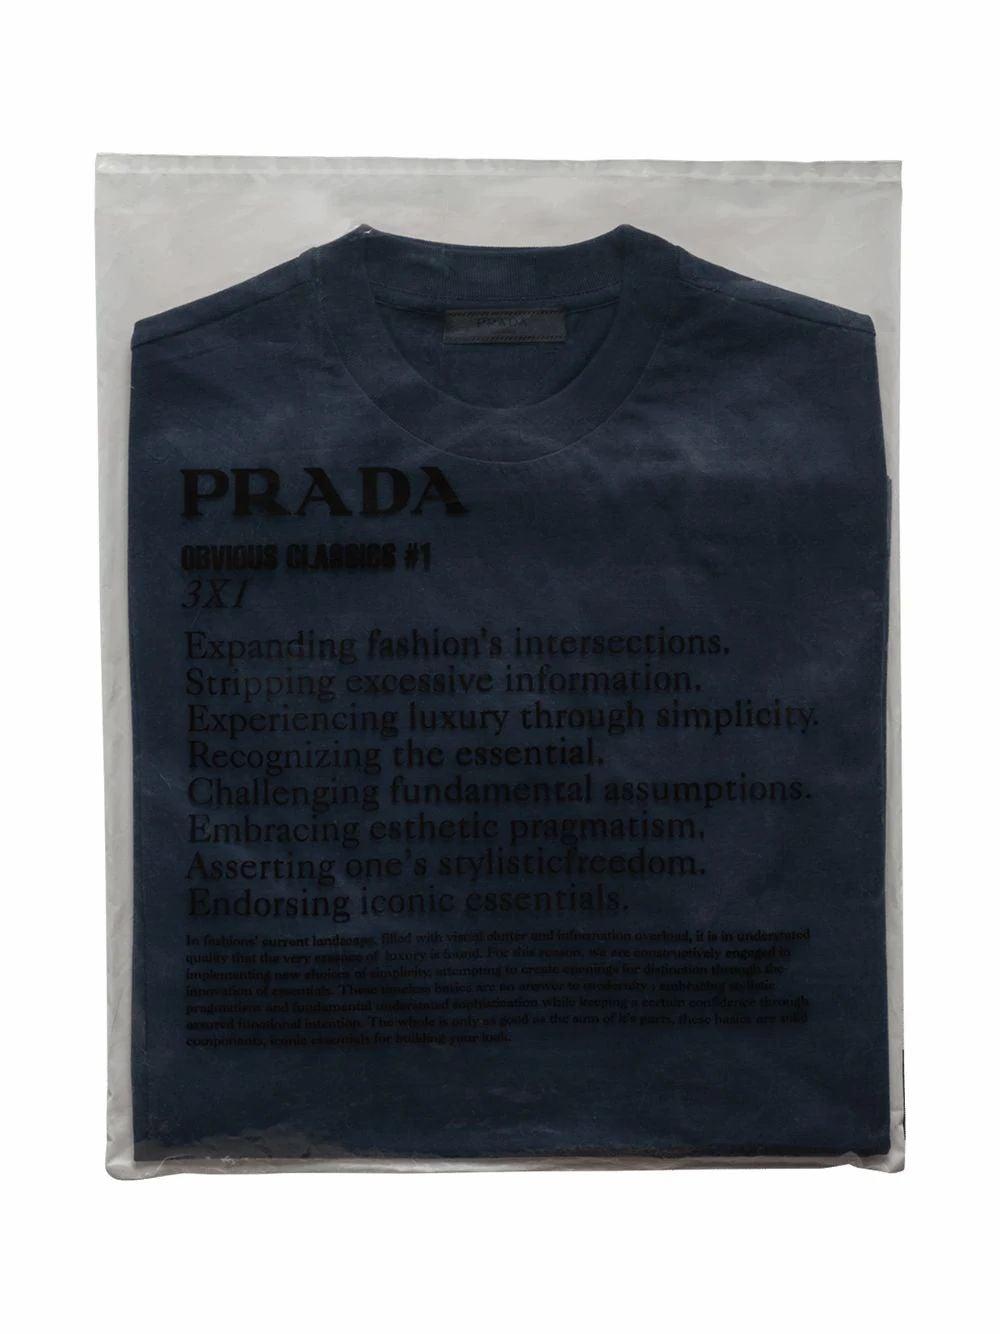 Prada Cotton Triple Pack Crew Neck T-shirts in Blue for Men - Save 